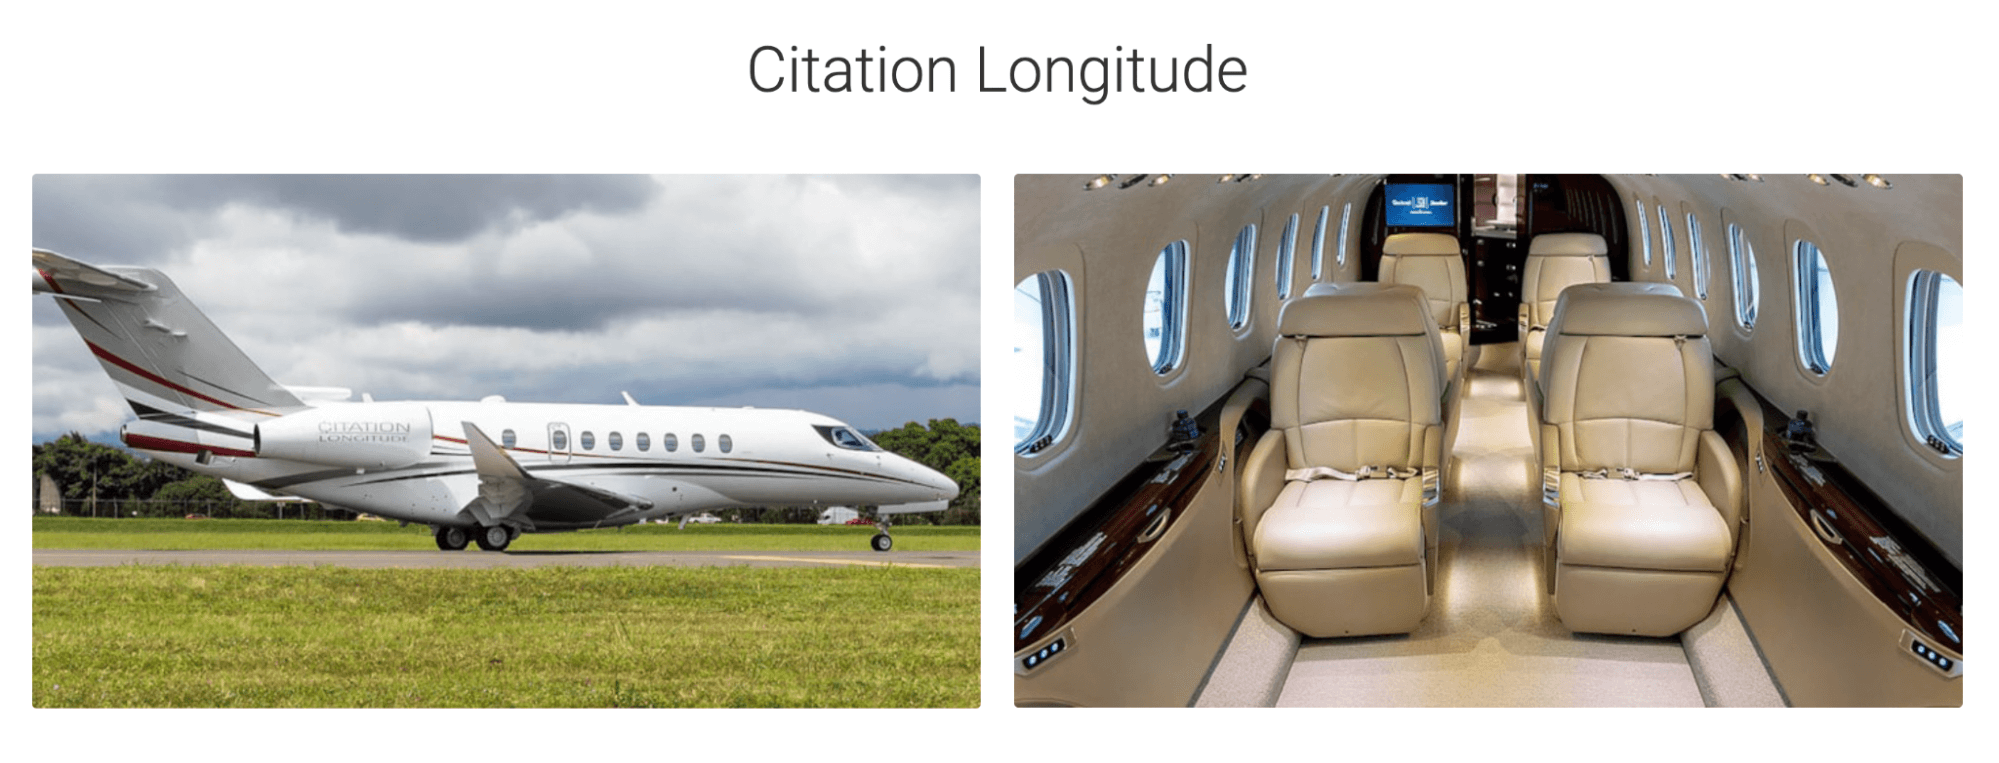 An exterior and interior picture of the corporate jet Citation Longitude.